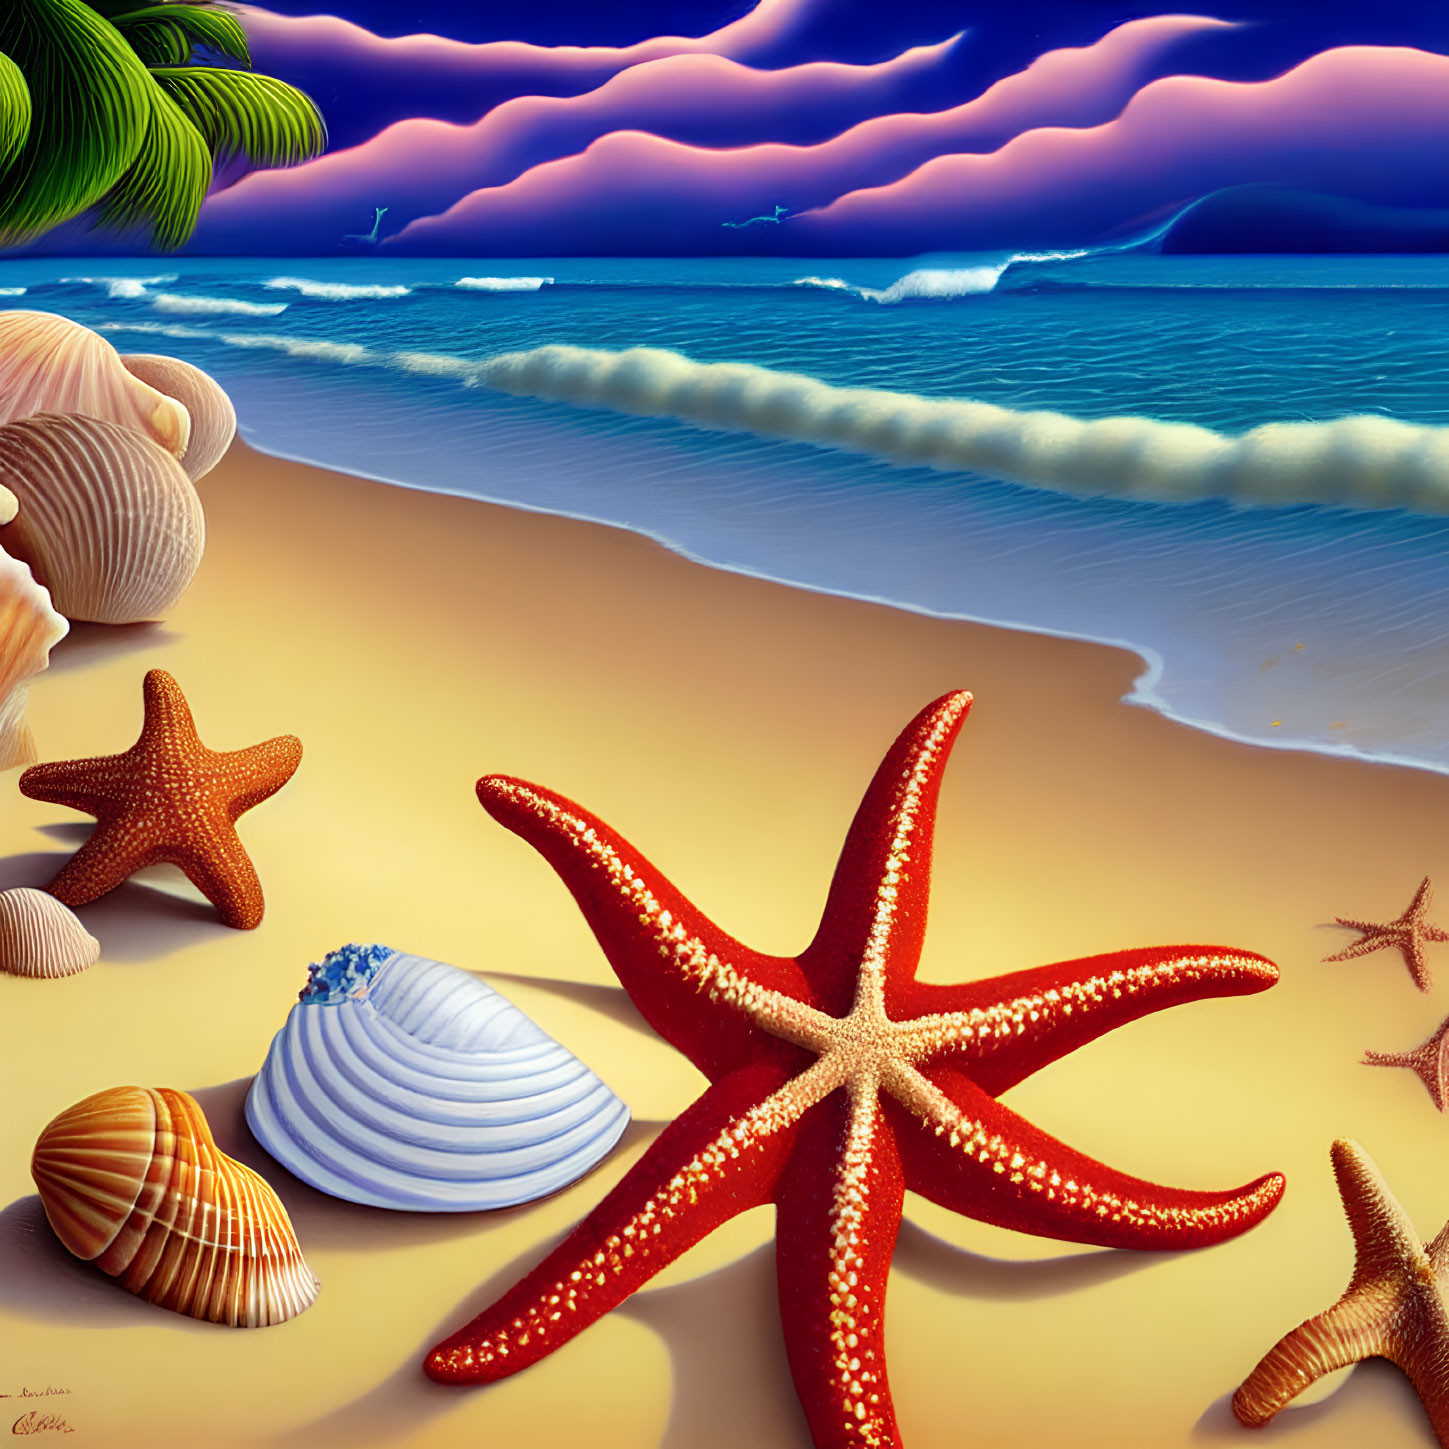 Tropical beach scene with starfish, shells, palm trees, and serene ocean at dusk